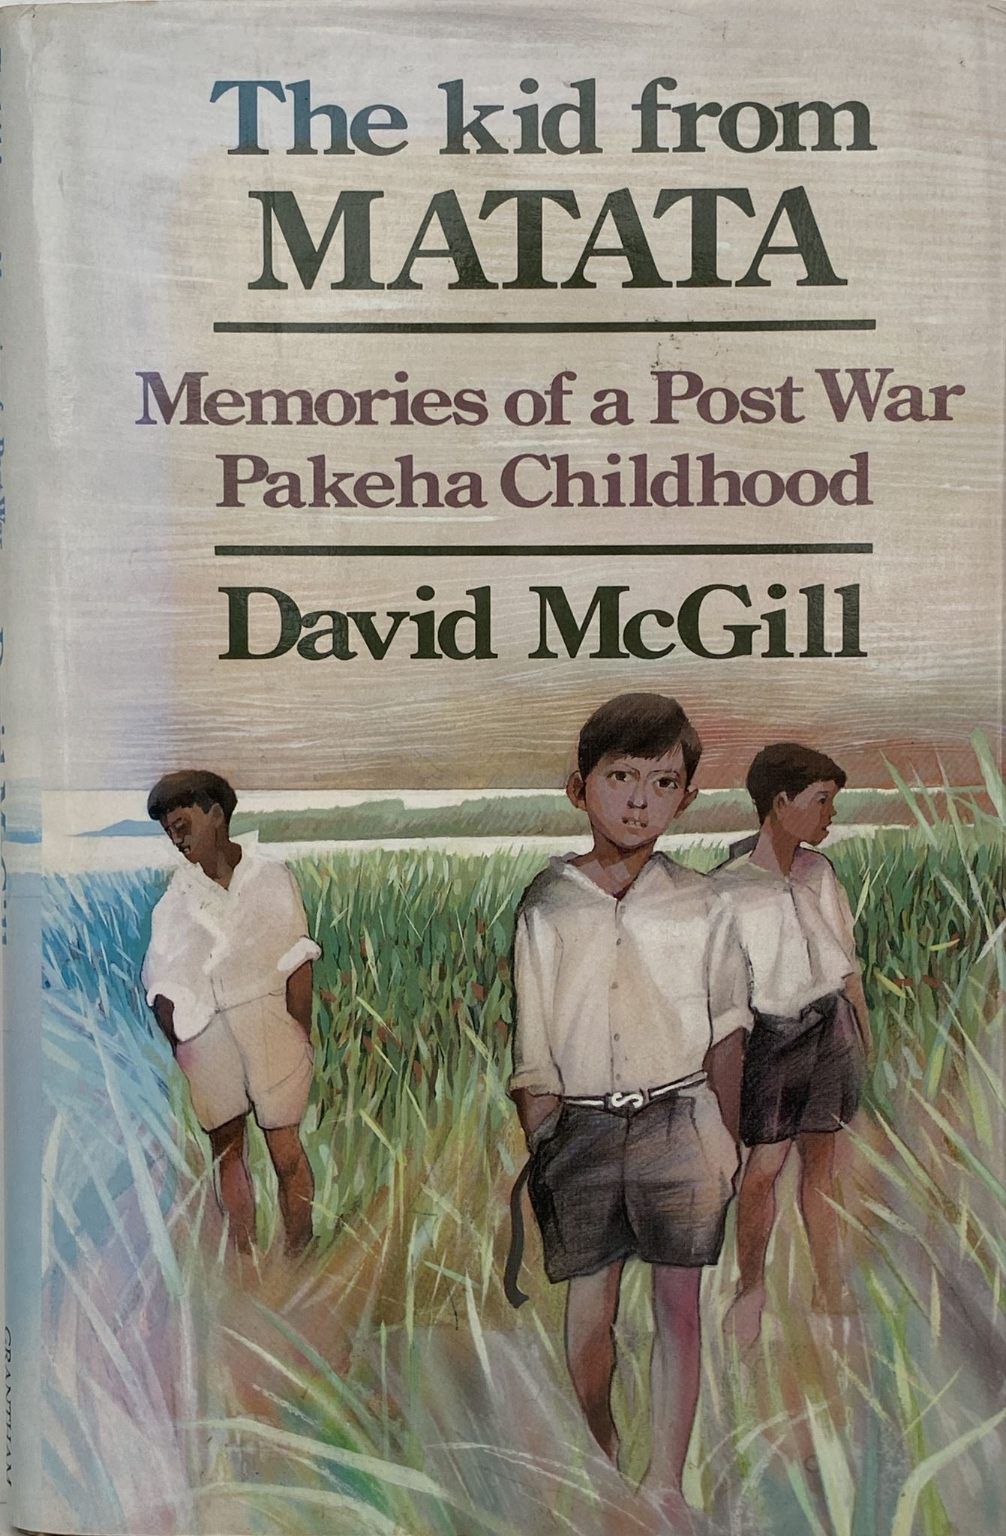 THE KID FROM MATATA: Memories of A Post War Pakeha Childhood